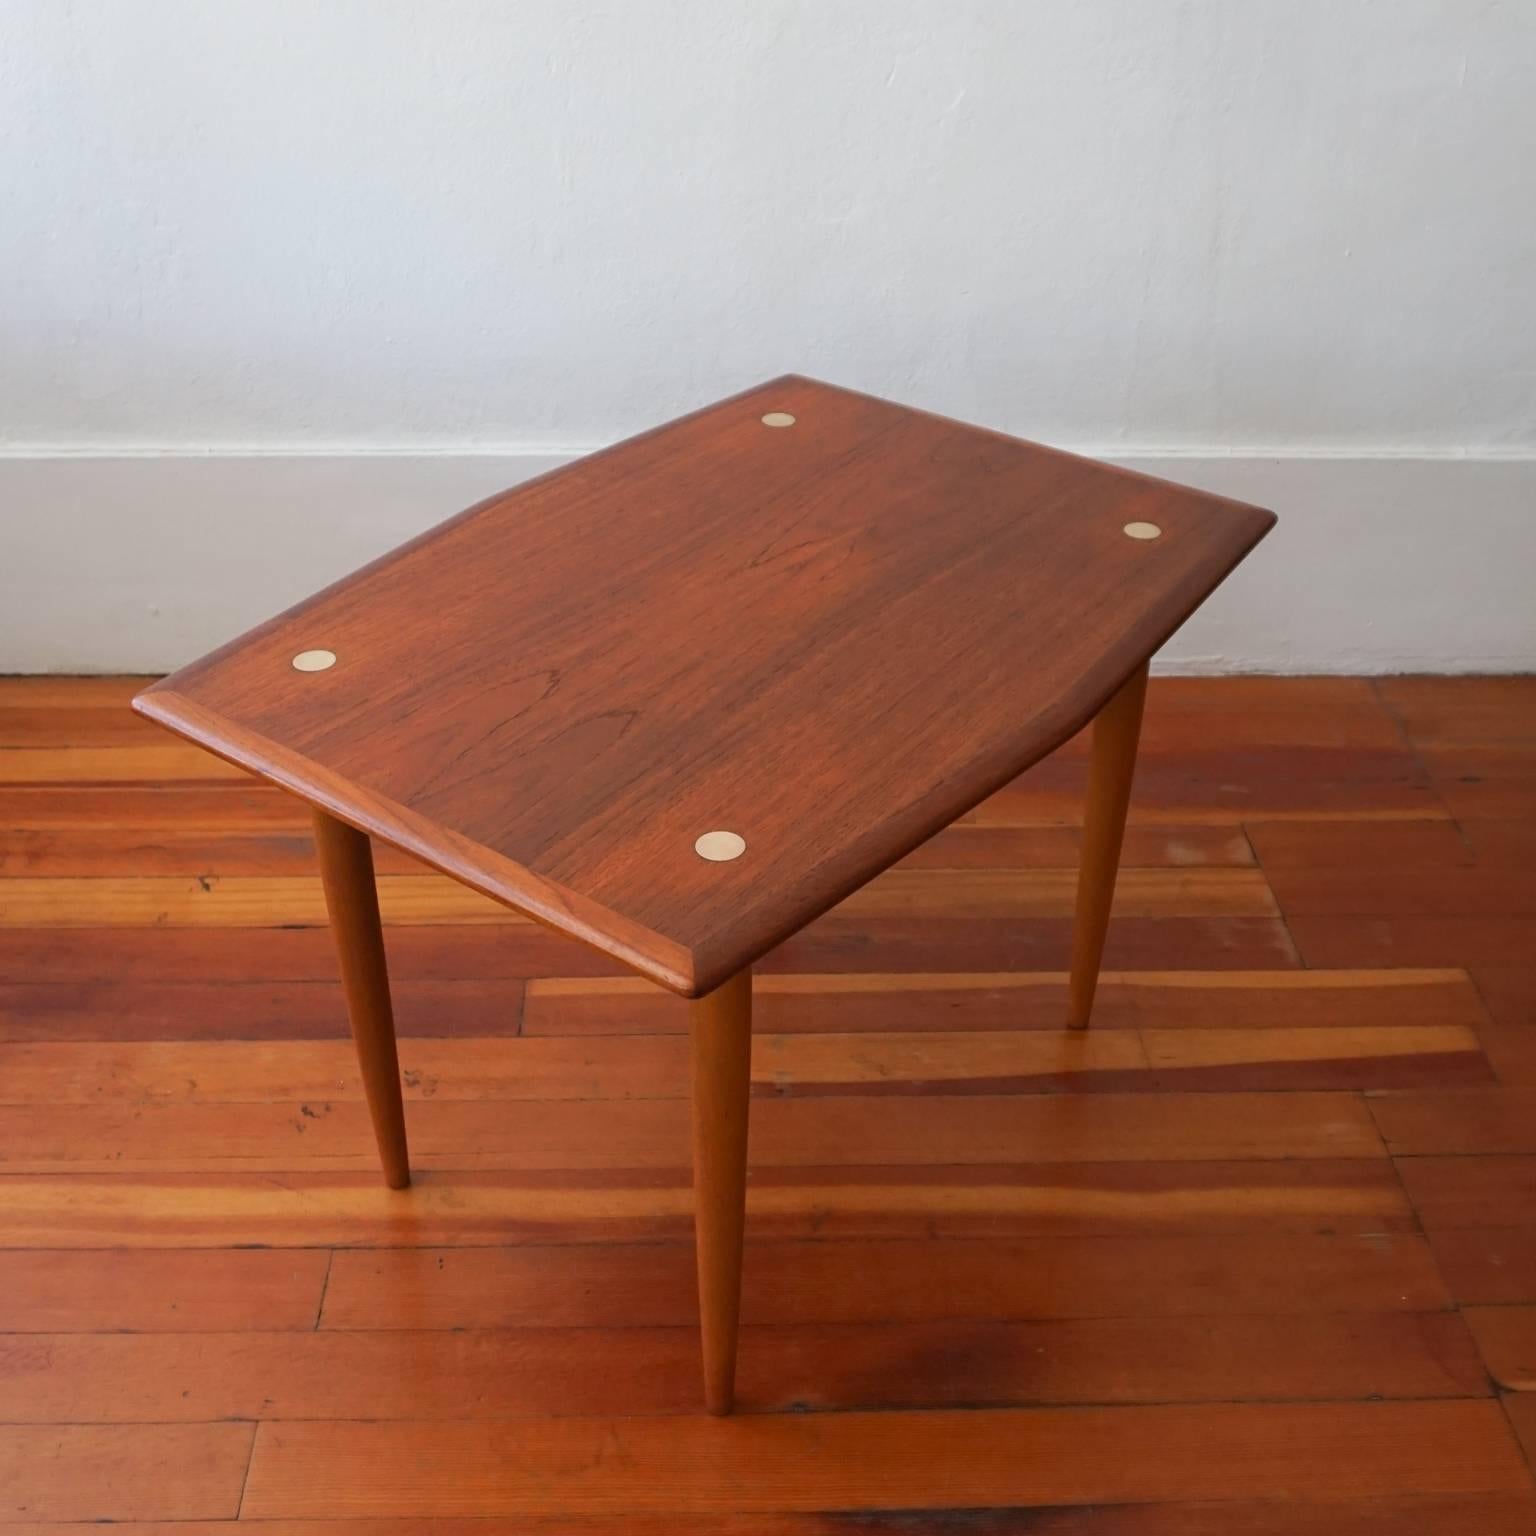 Pair of teak tables with brass inserts and angular sides, by DUX of Sweden, 1950s.